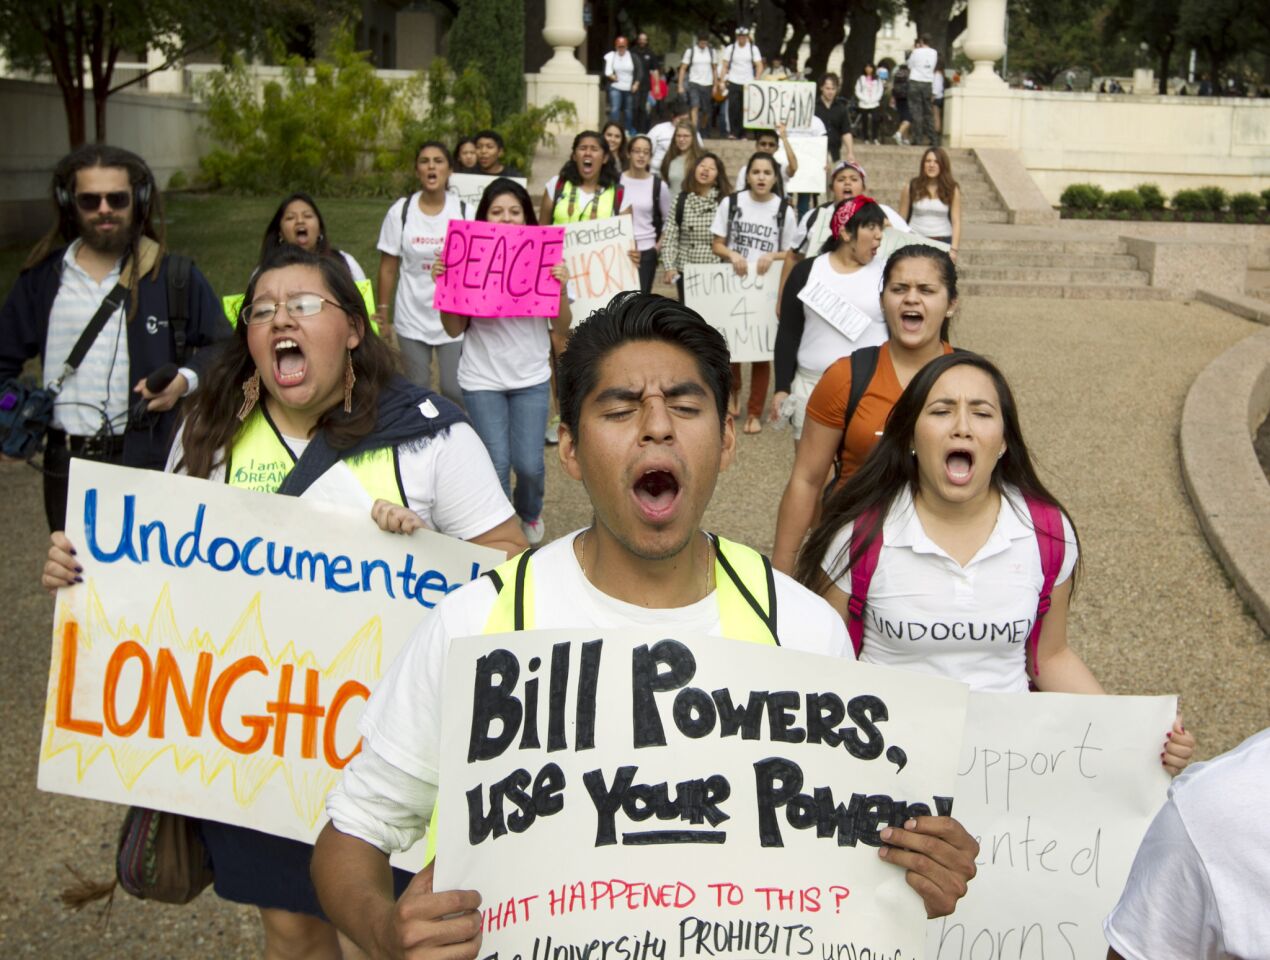 Student Jonathan Hernandez, center, marches in an immigration rights rally on the University of Texas campus in Austin.